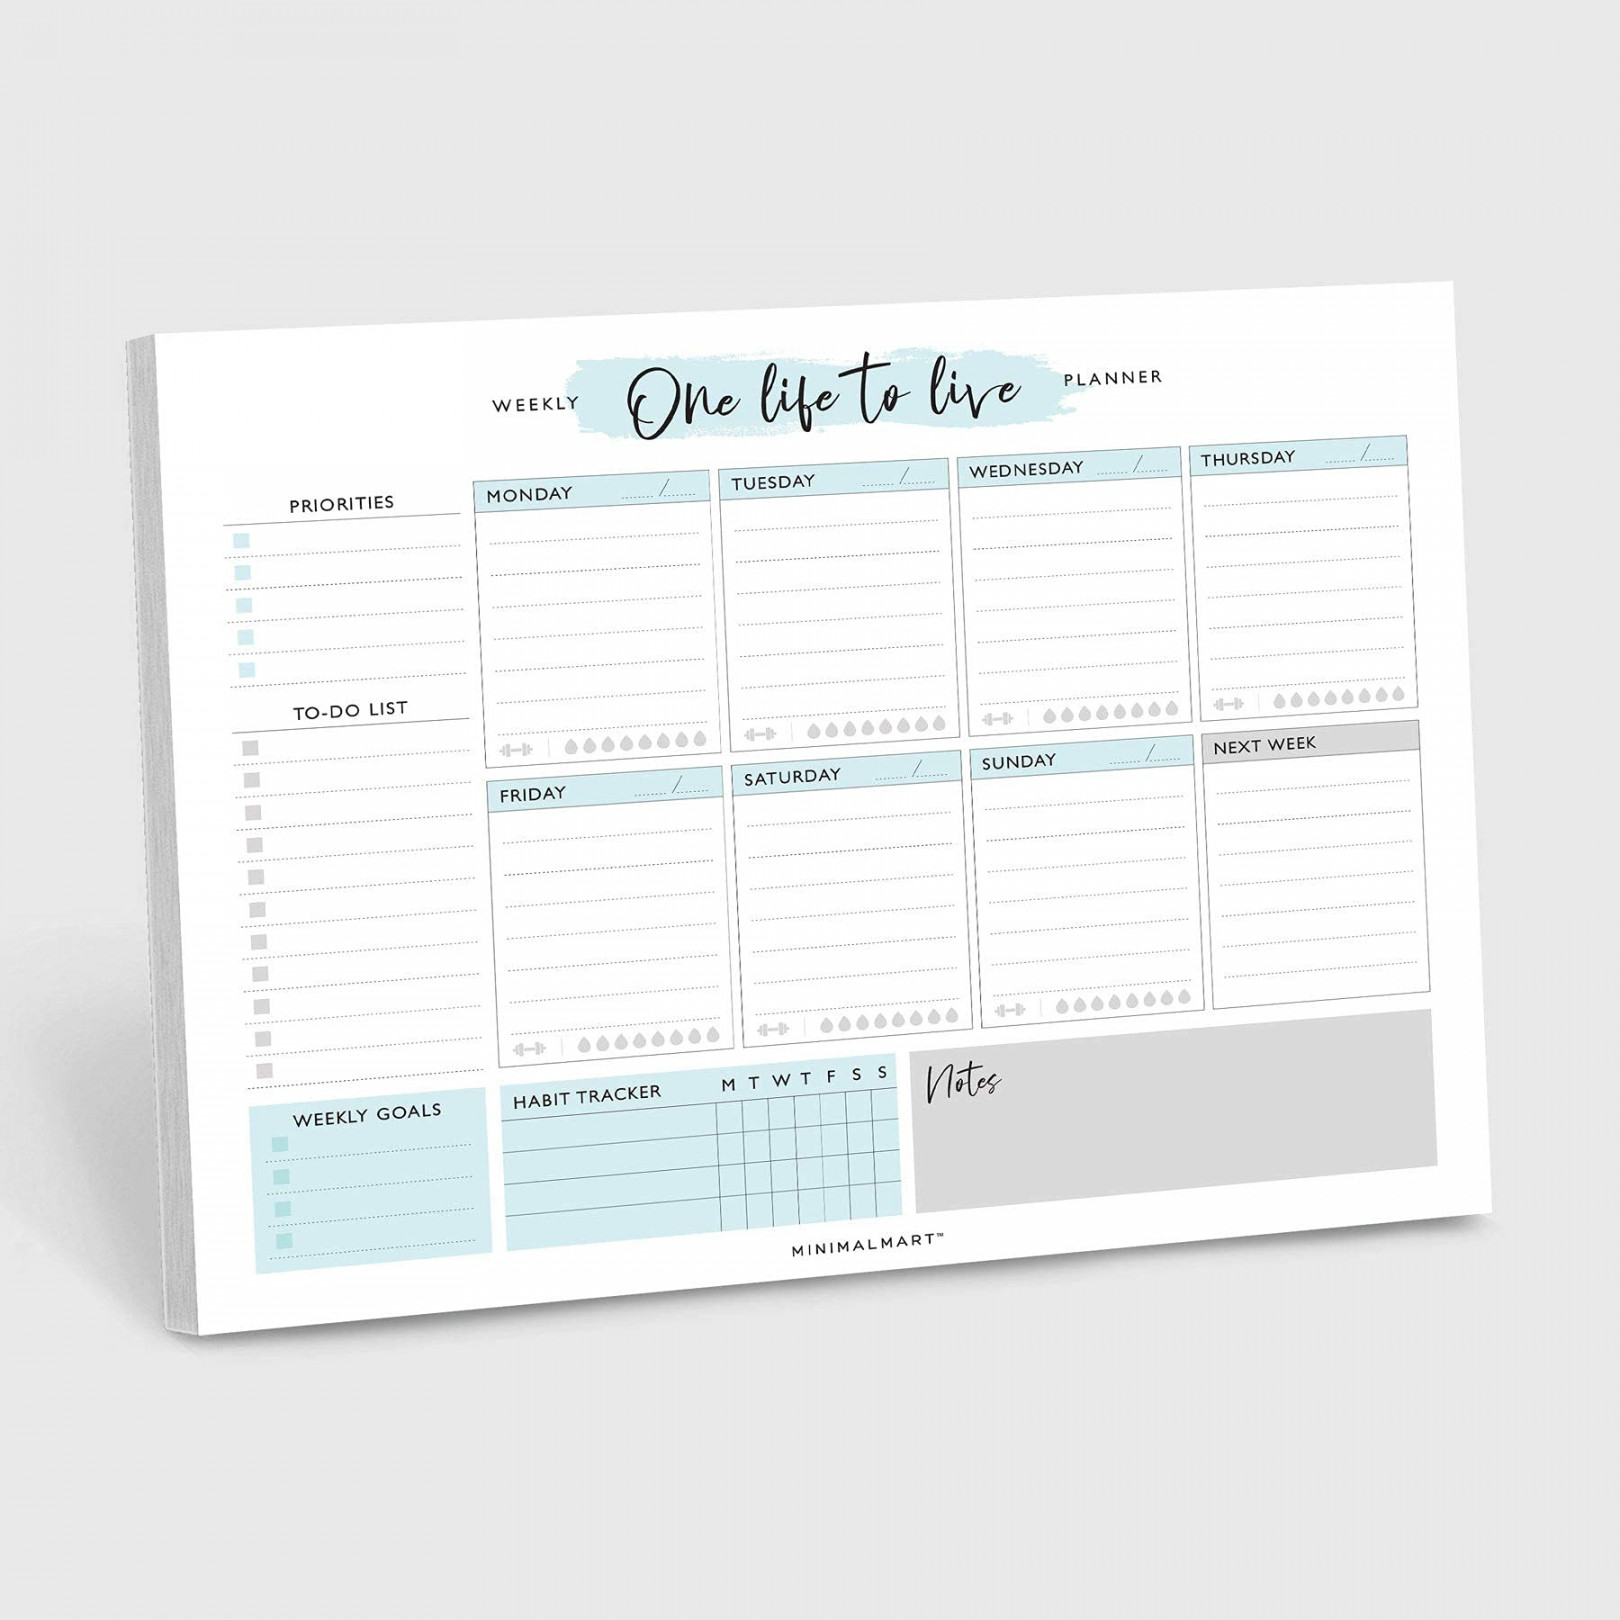 Cute Weekly Planner By Minimalmart   Undated Tear-Off Sheets Personal  Productivity Calendar OrgaSee more Cute Weekly Planner By Minimalmart